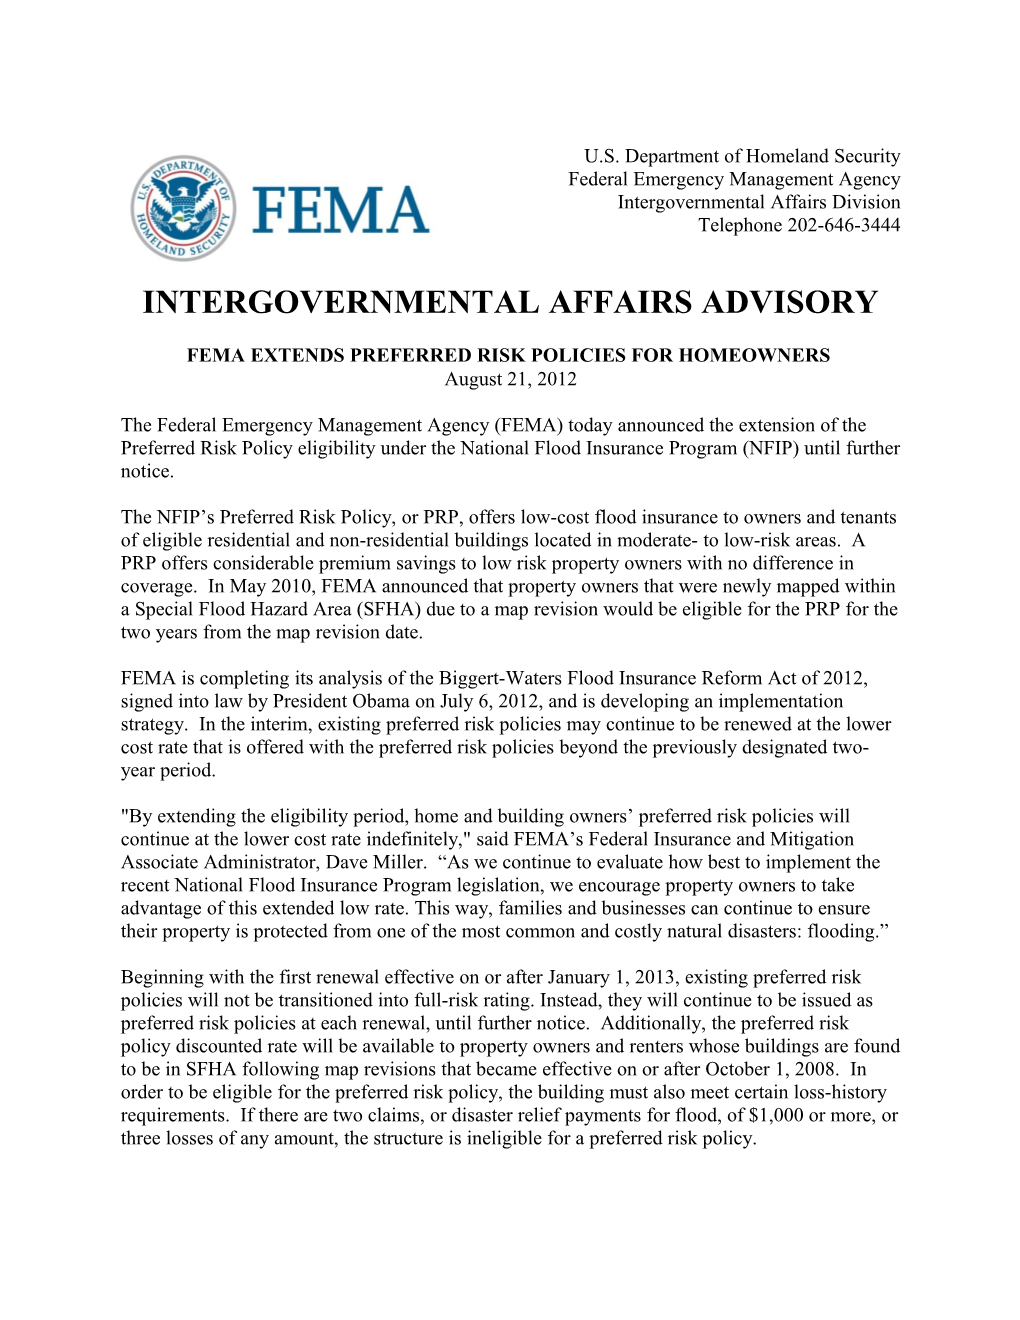 Fema Extends Preferred Risk Policies for Homeowners